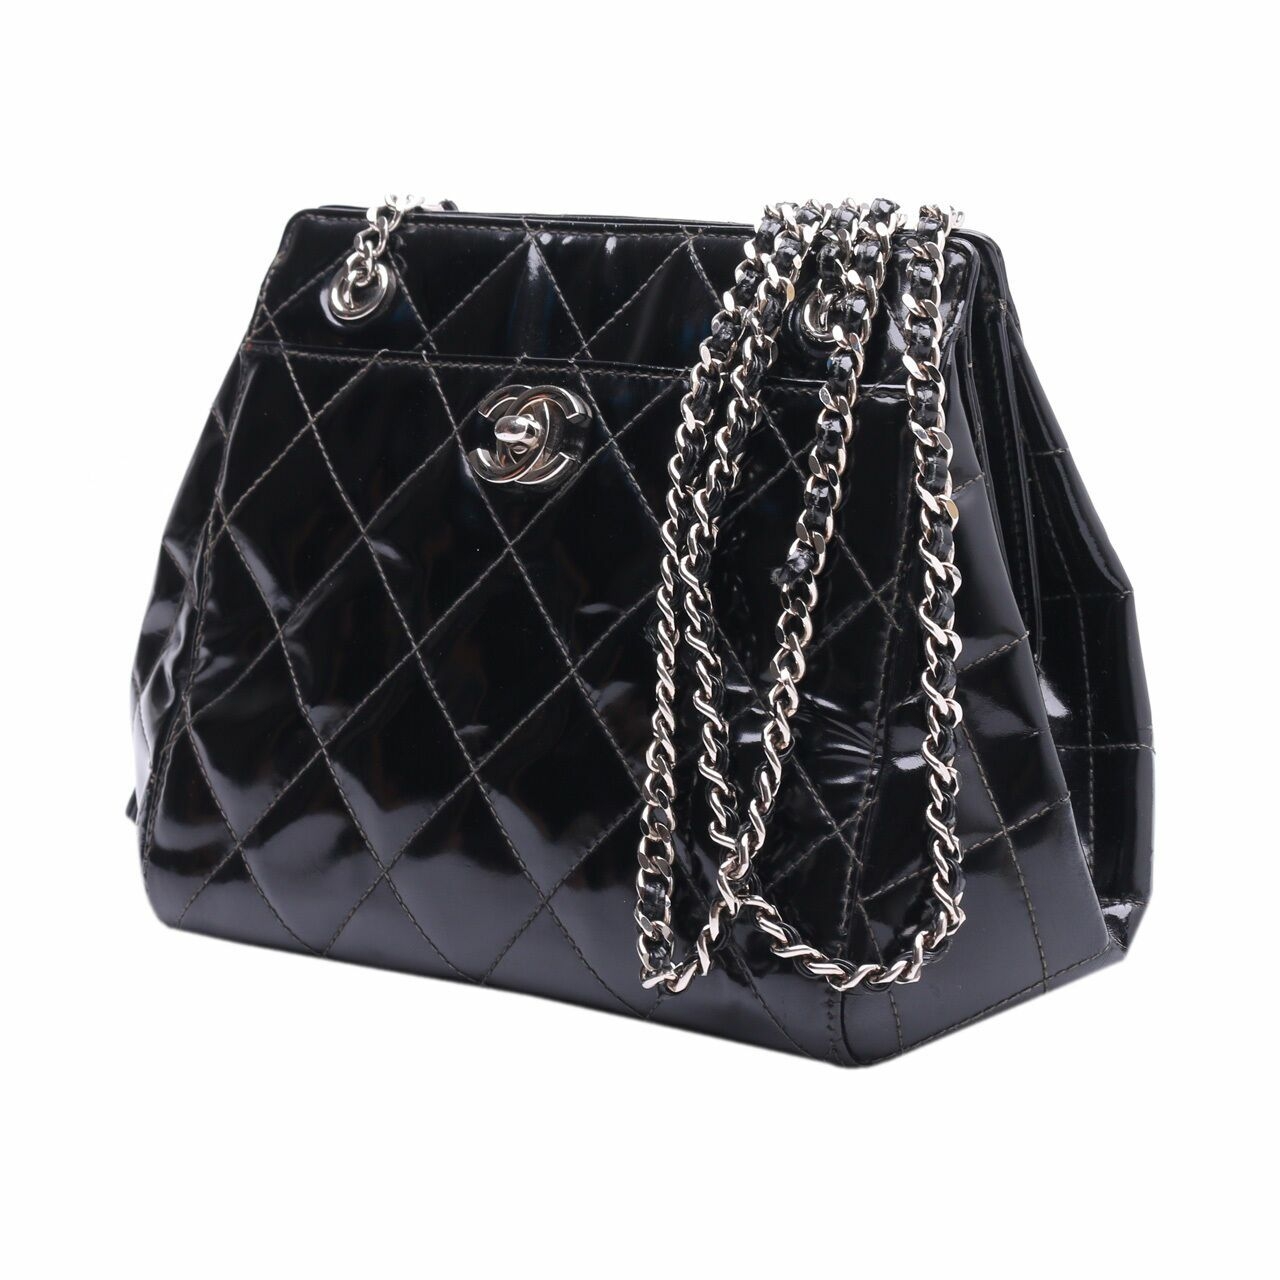 Chanel Quilted Black Patent Leather Sling Bag